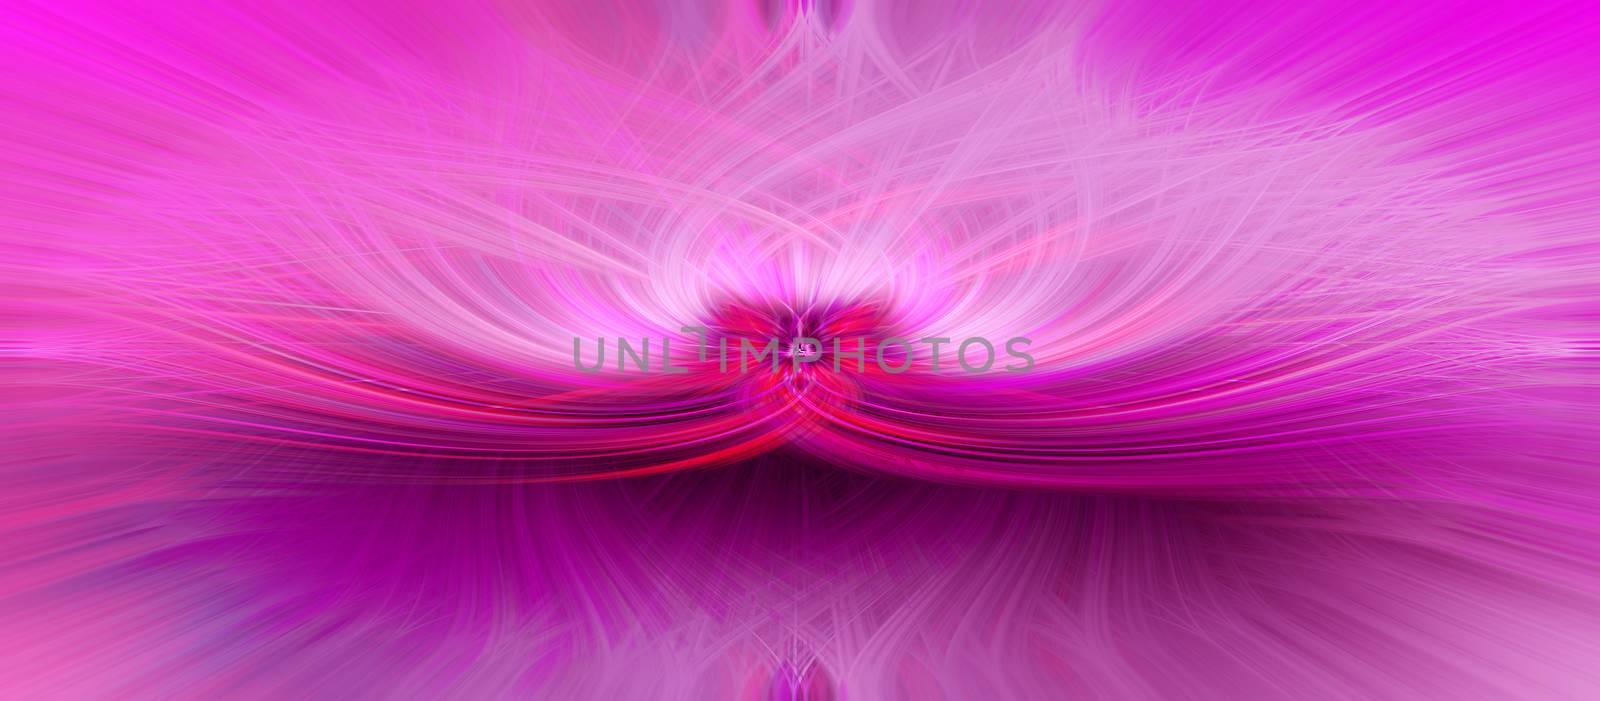 Beautiful abstract intertwined symmetrical 3d fibers forming a shape of sparkle, flame, flower, interlinked hearts. Pink, maroon, and purple colors. Illustration.